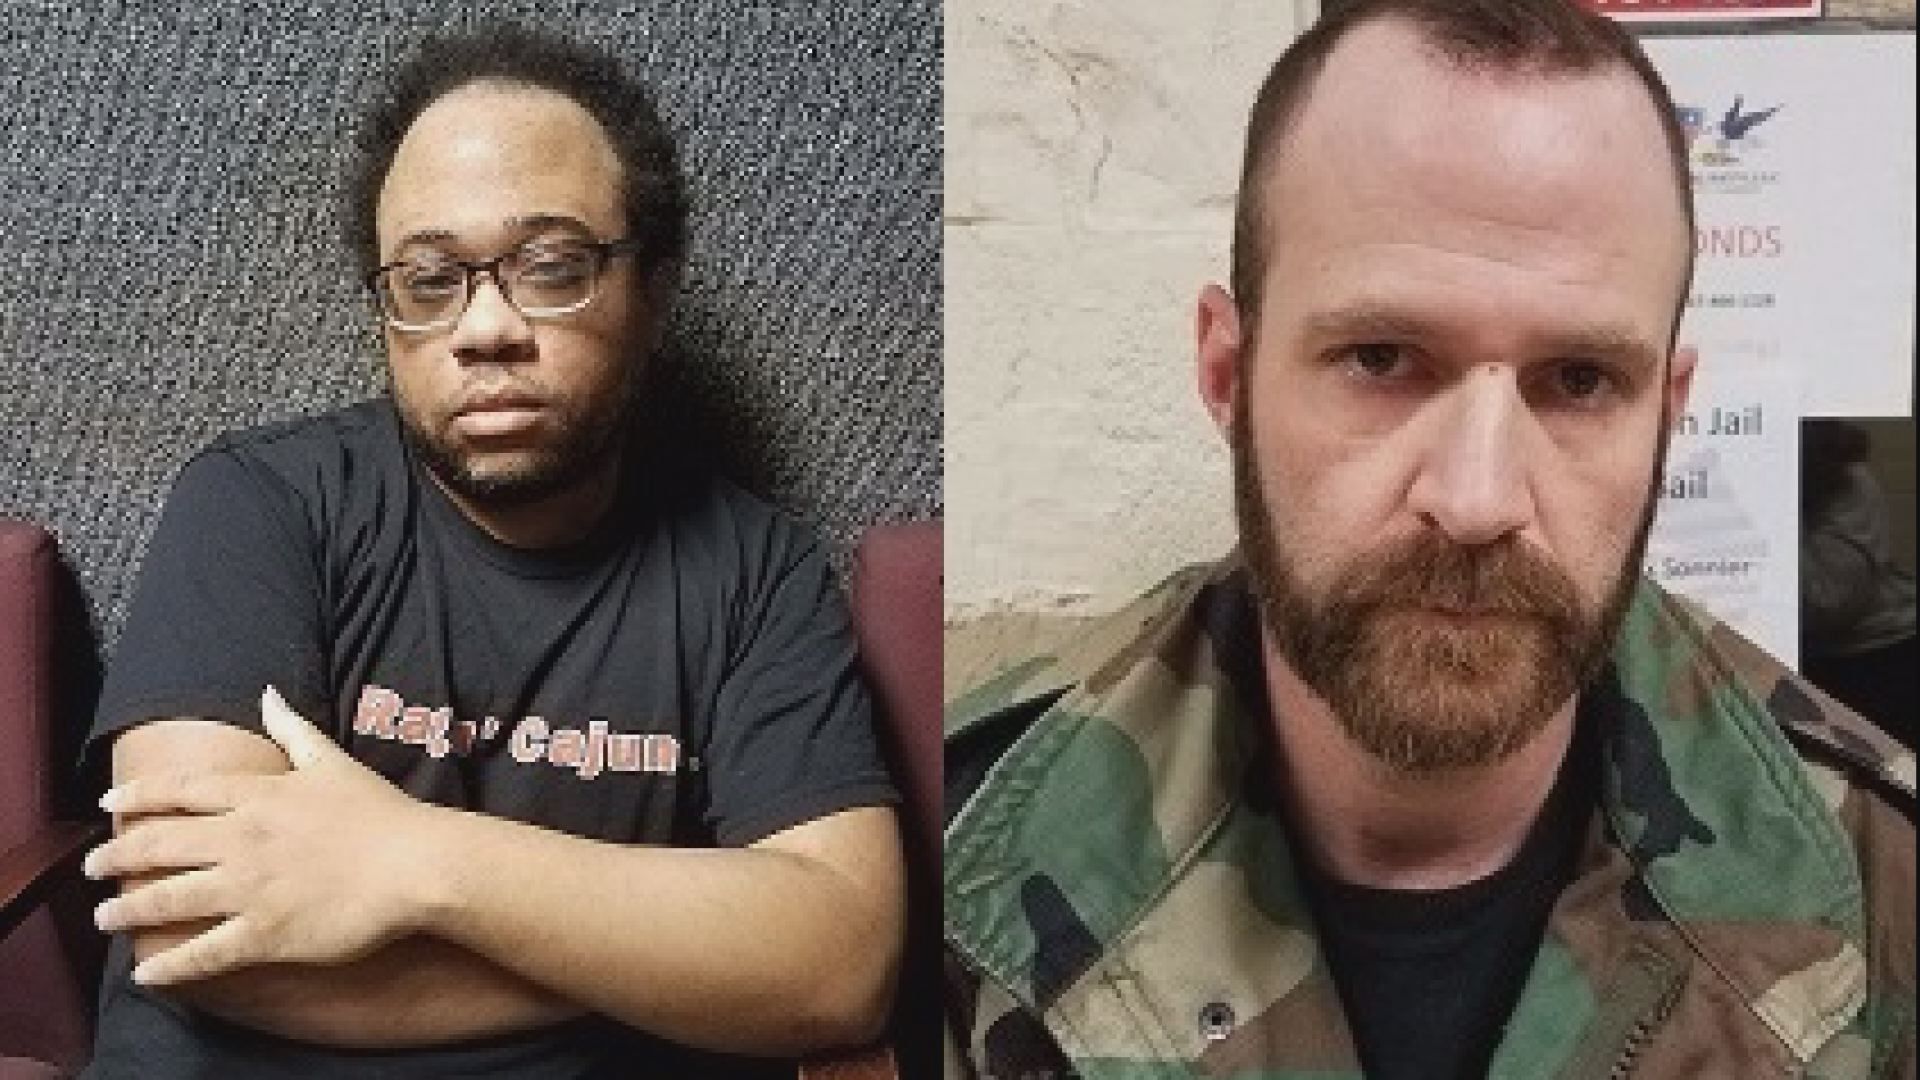 Bunkie man and Eunice man arrested for child porn charges